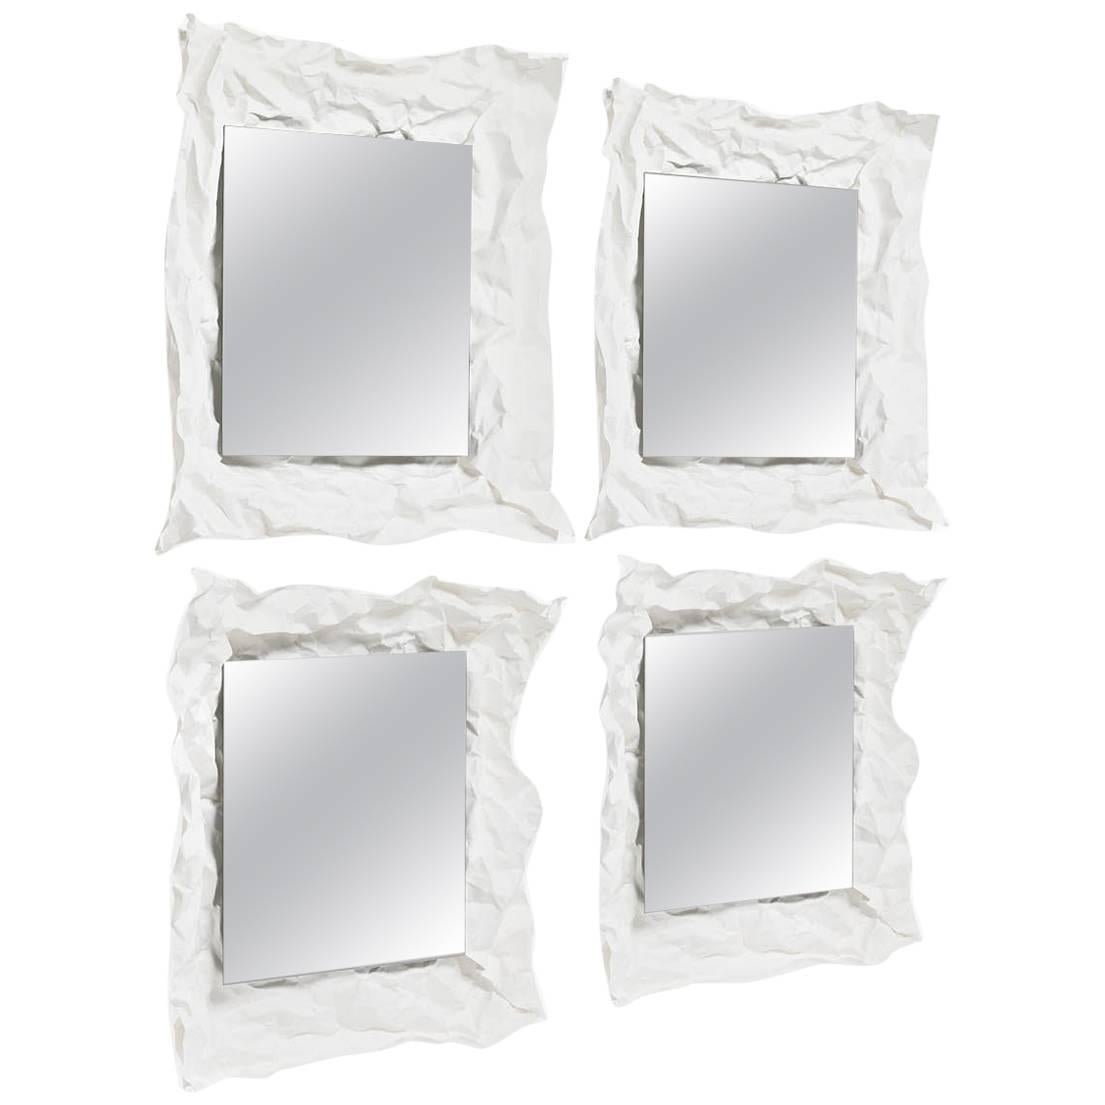 Pair of Small Wow Mirror in White by Uto Balmoral & Mogg